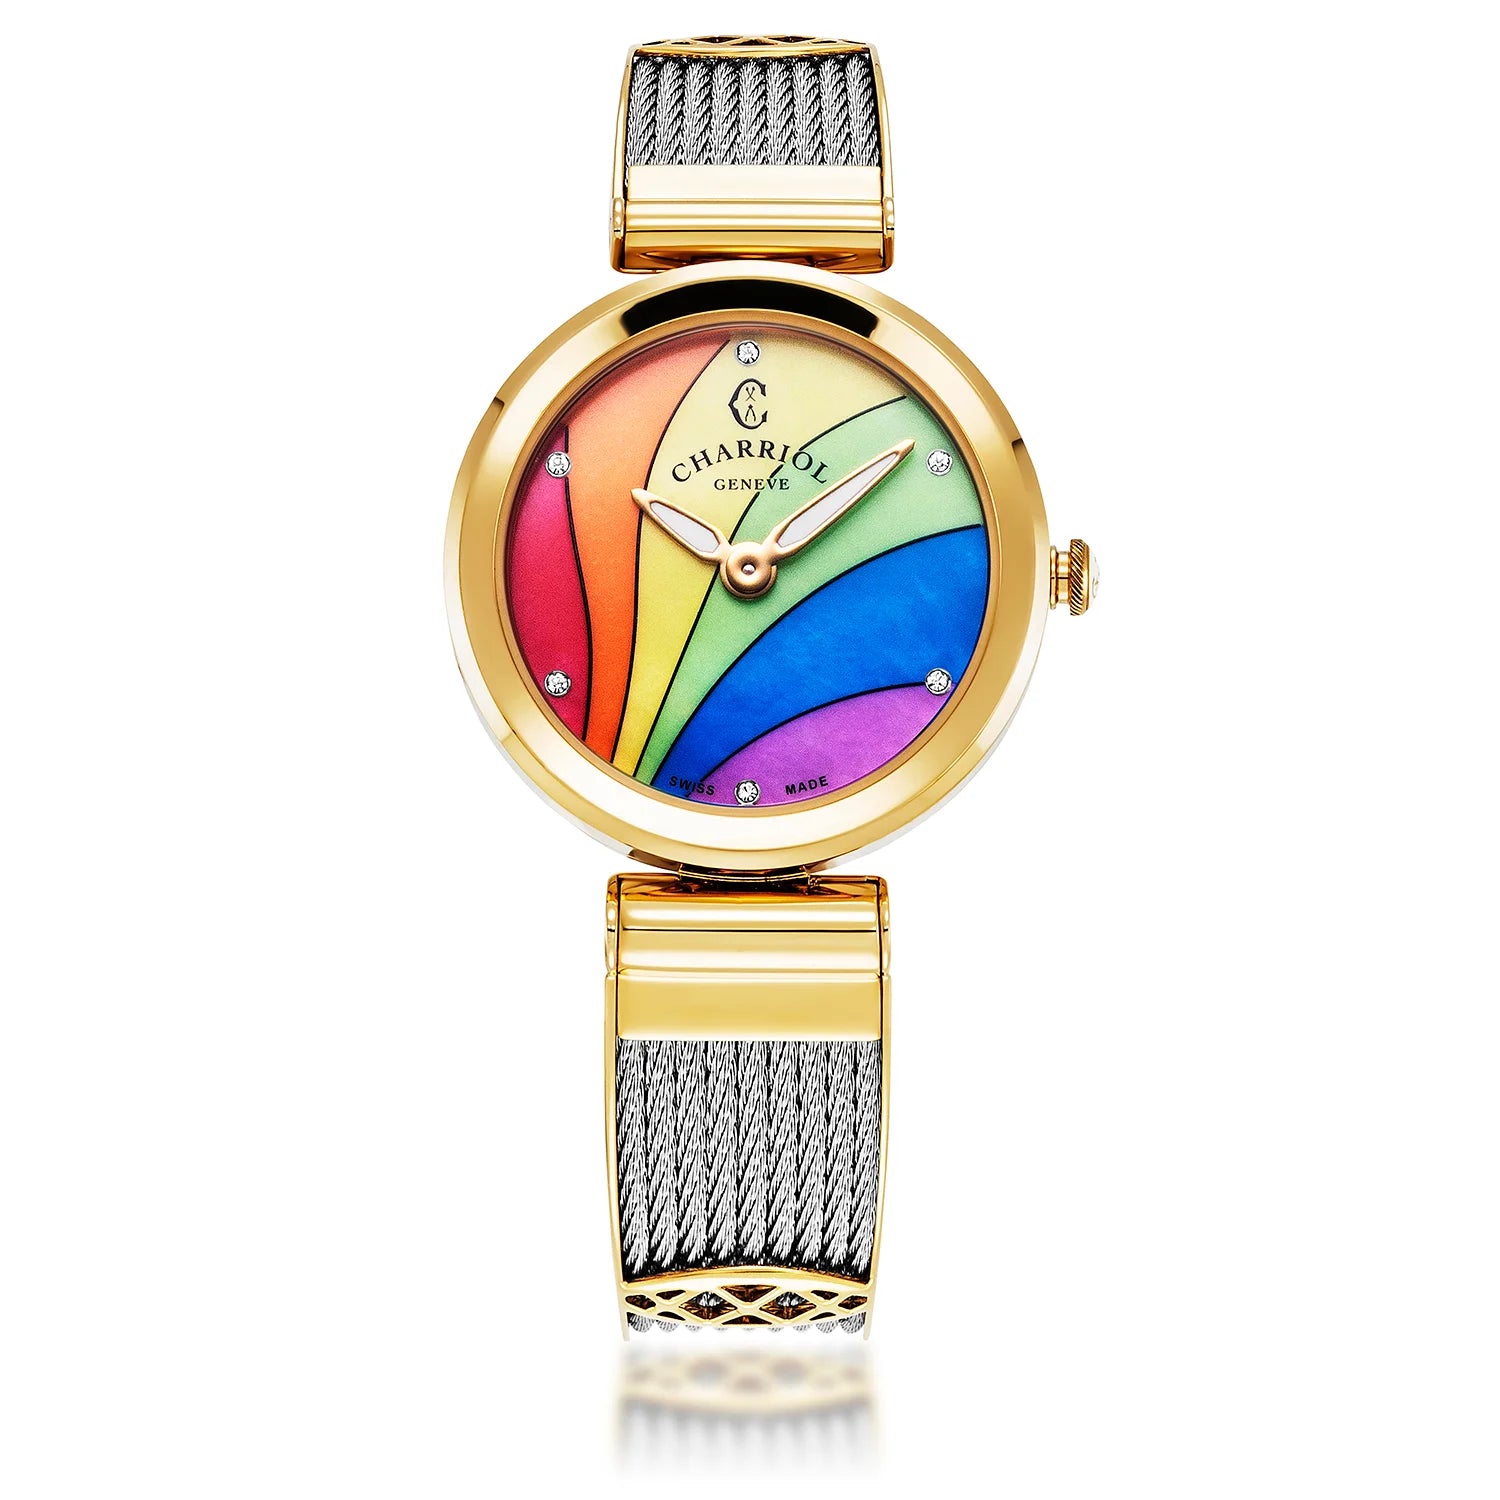 Forever Watch Rainbow motif and Yellow Gold - Charriol Geneve -  Watch